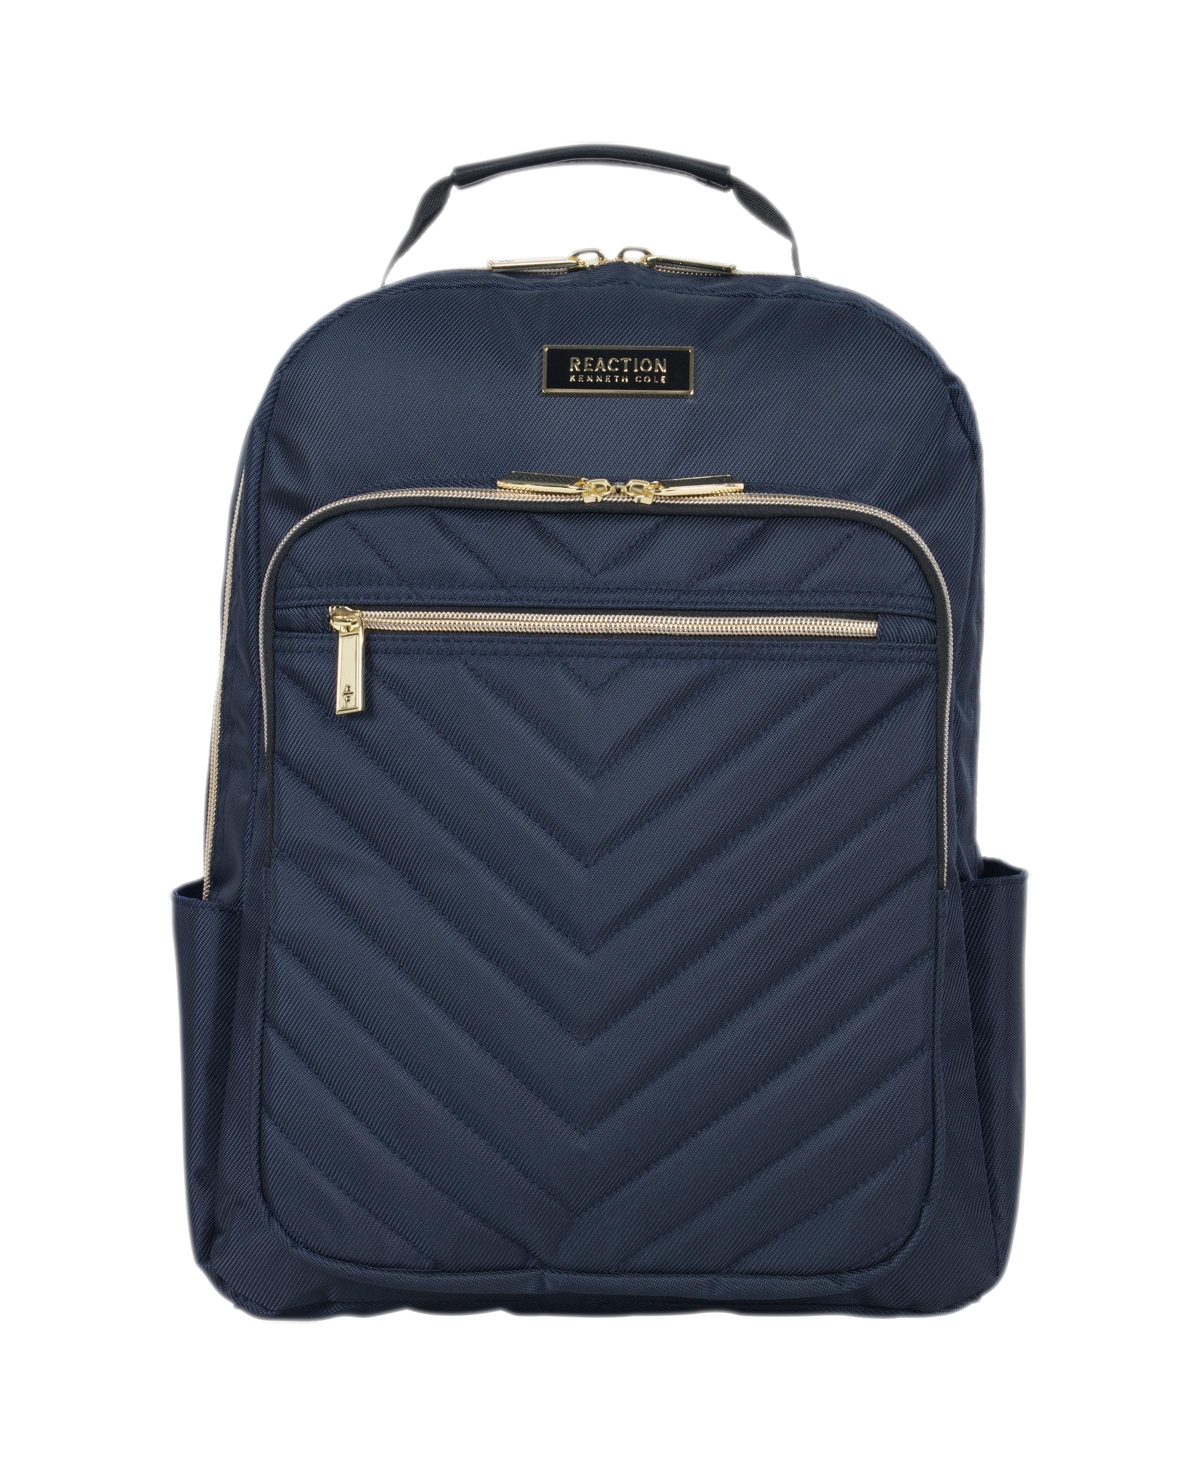 Chelsea Women's Chevron Quilted 15-Inch Laptop & Tablet Fashion Travel Backpack - Navy